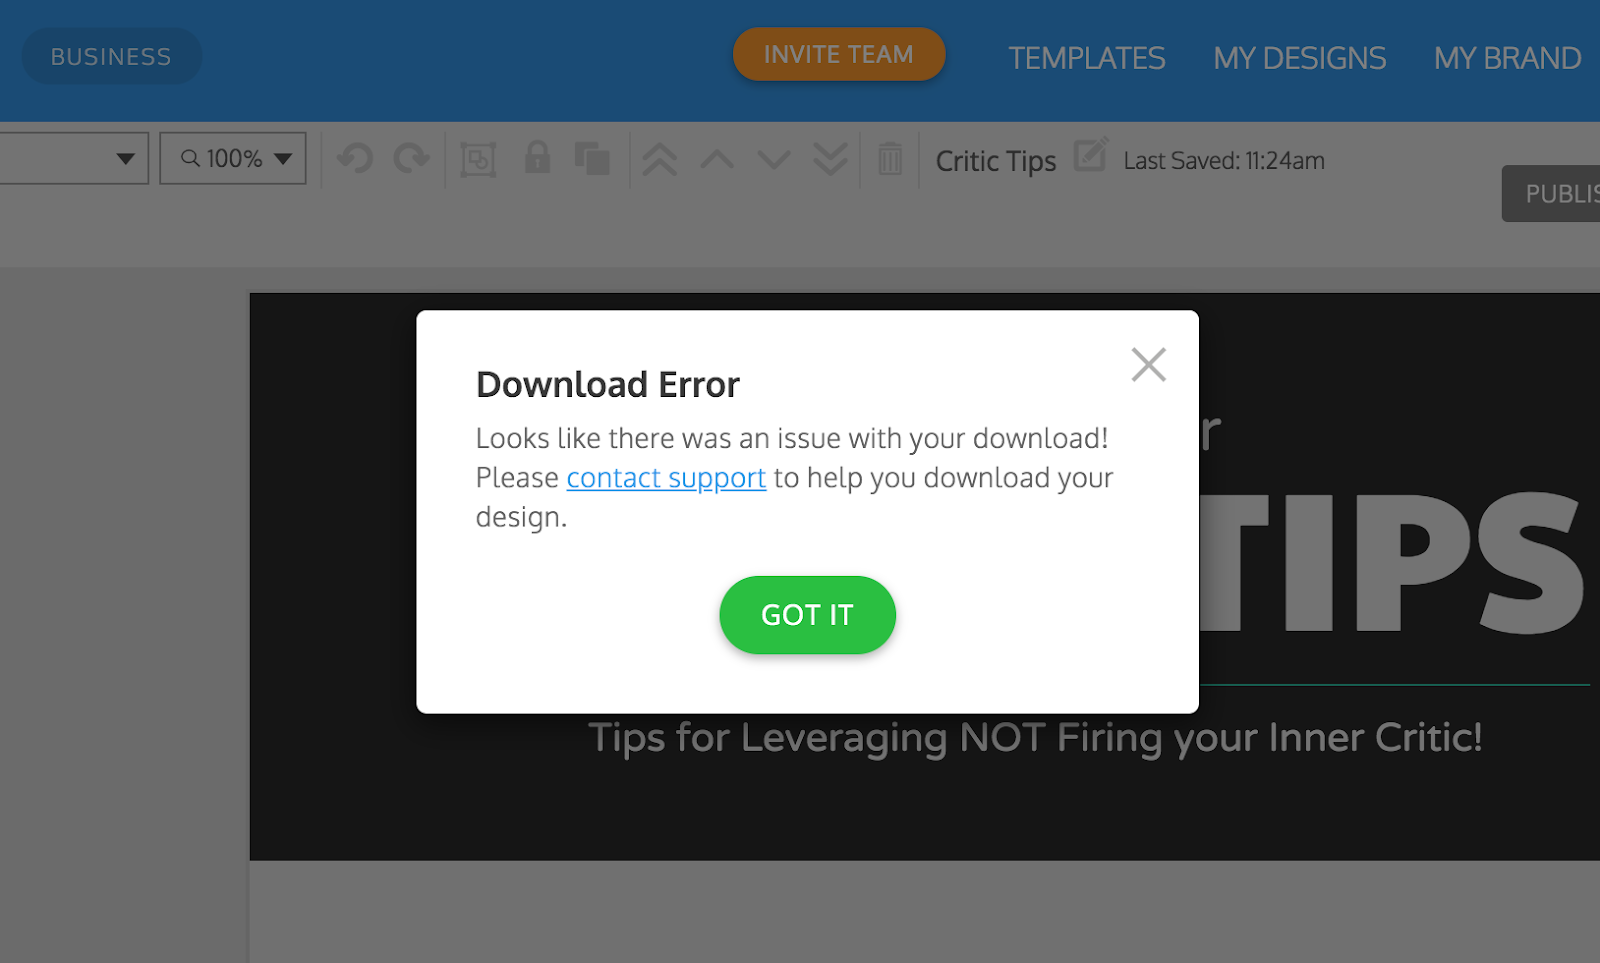 A screen grab of the Venngage editor with a message pop-up in overlay. The error pop-up says 'Download Error - Looks like there was an issue with your download. Please contact support to help you download your design'. A green button at the bottom of the pop-up says 'Got it'.